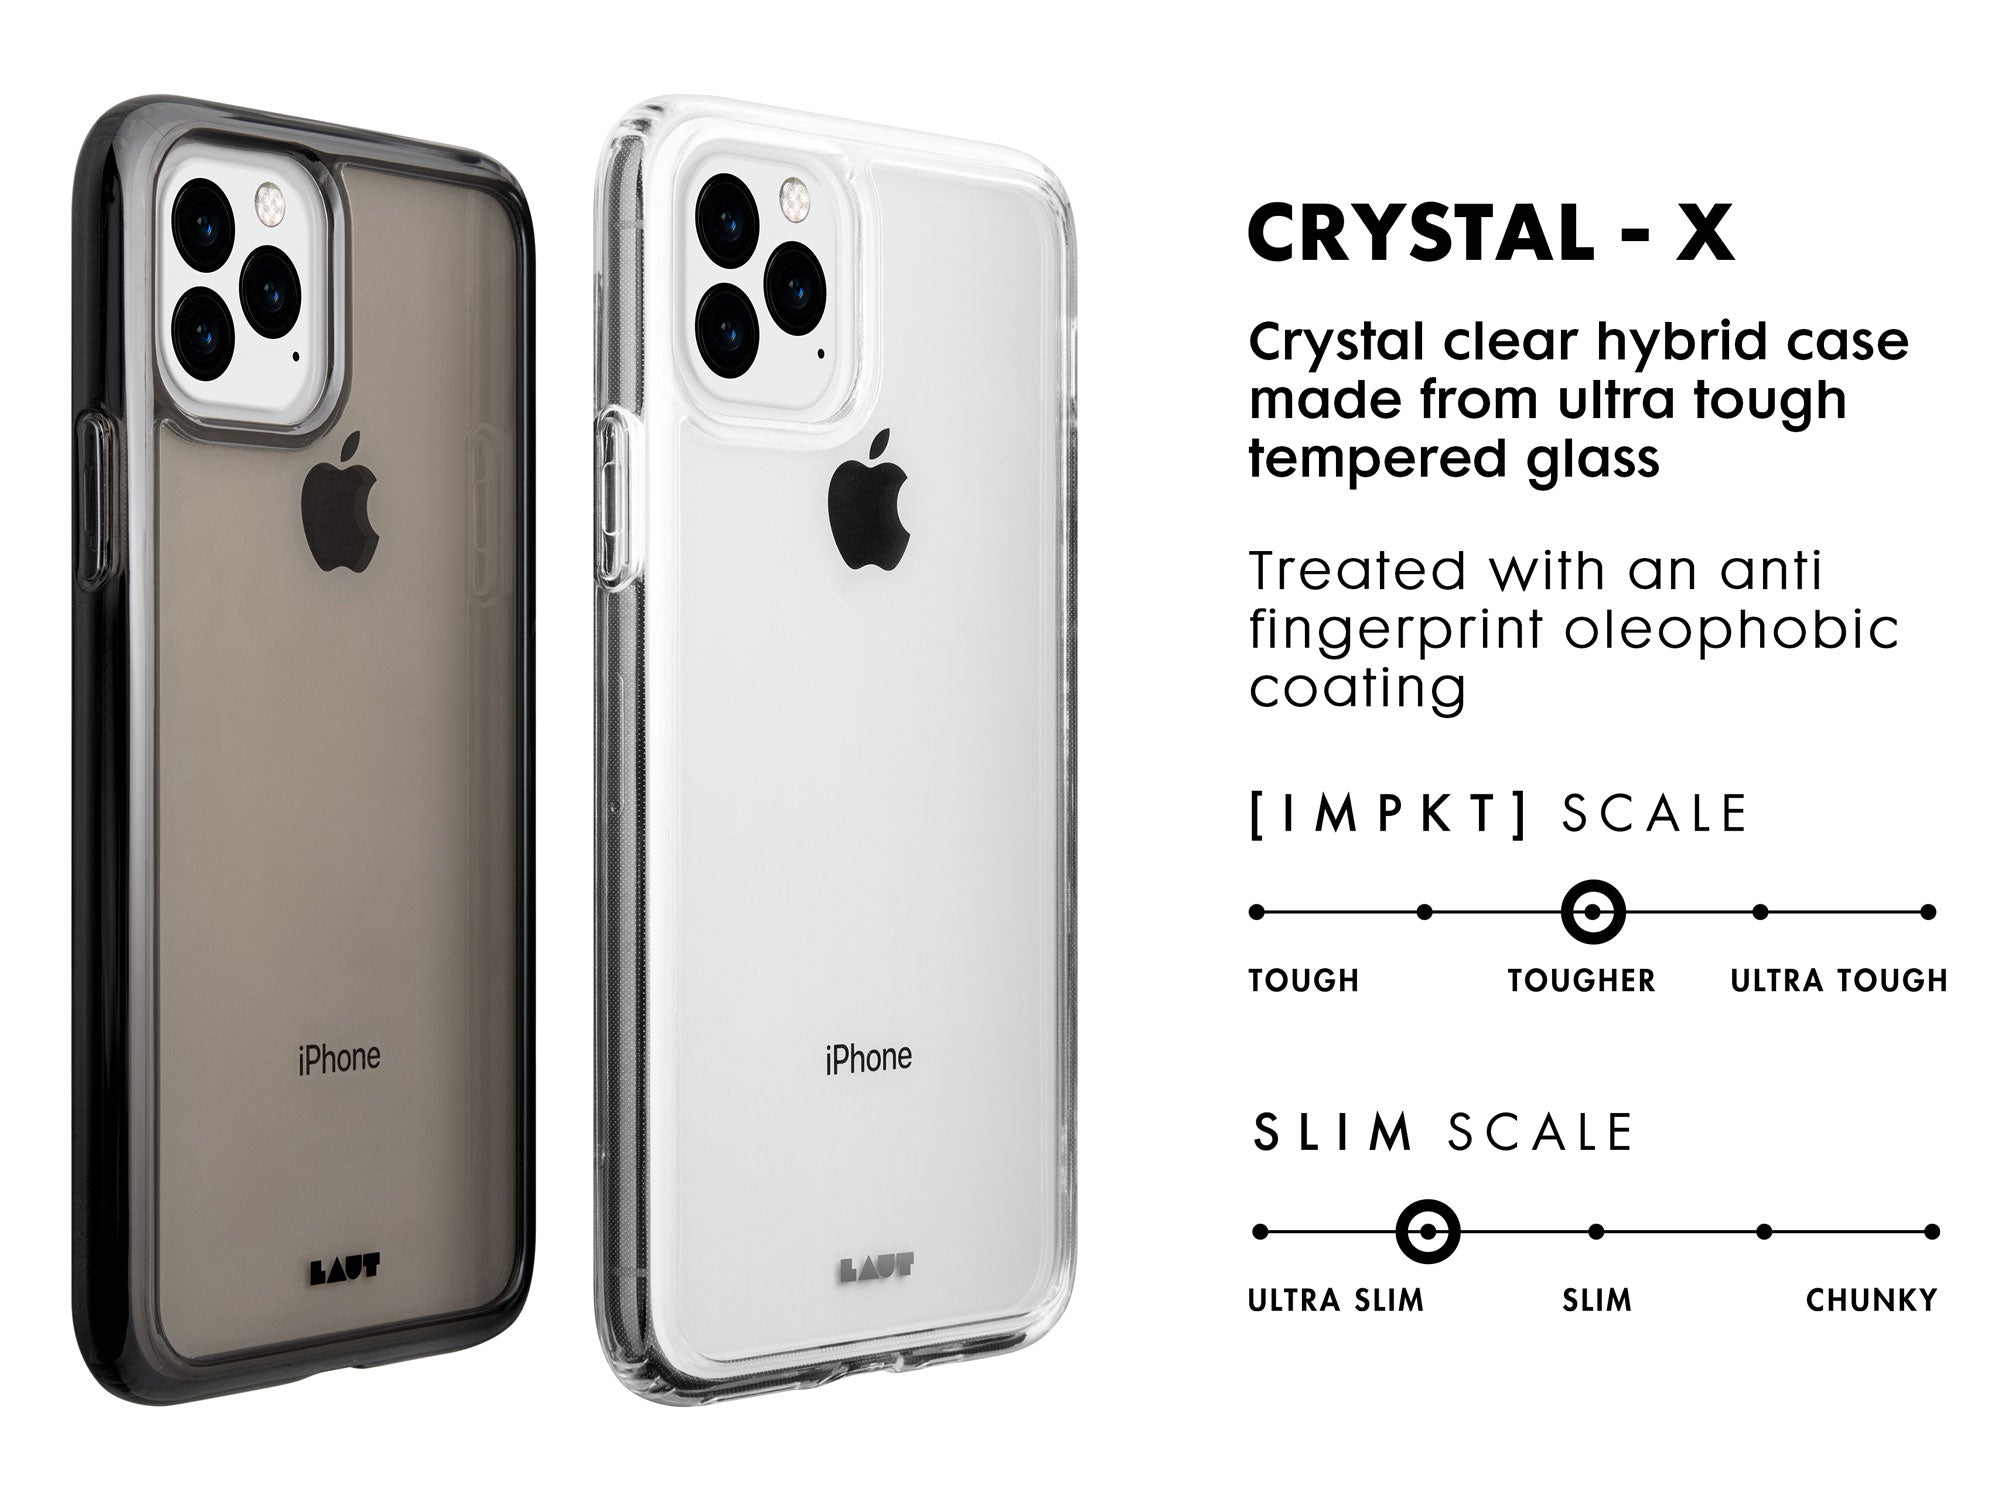 Crystal-X for iPhone 11 series